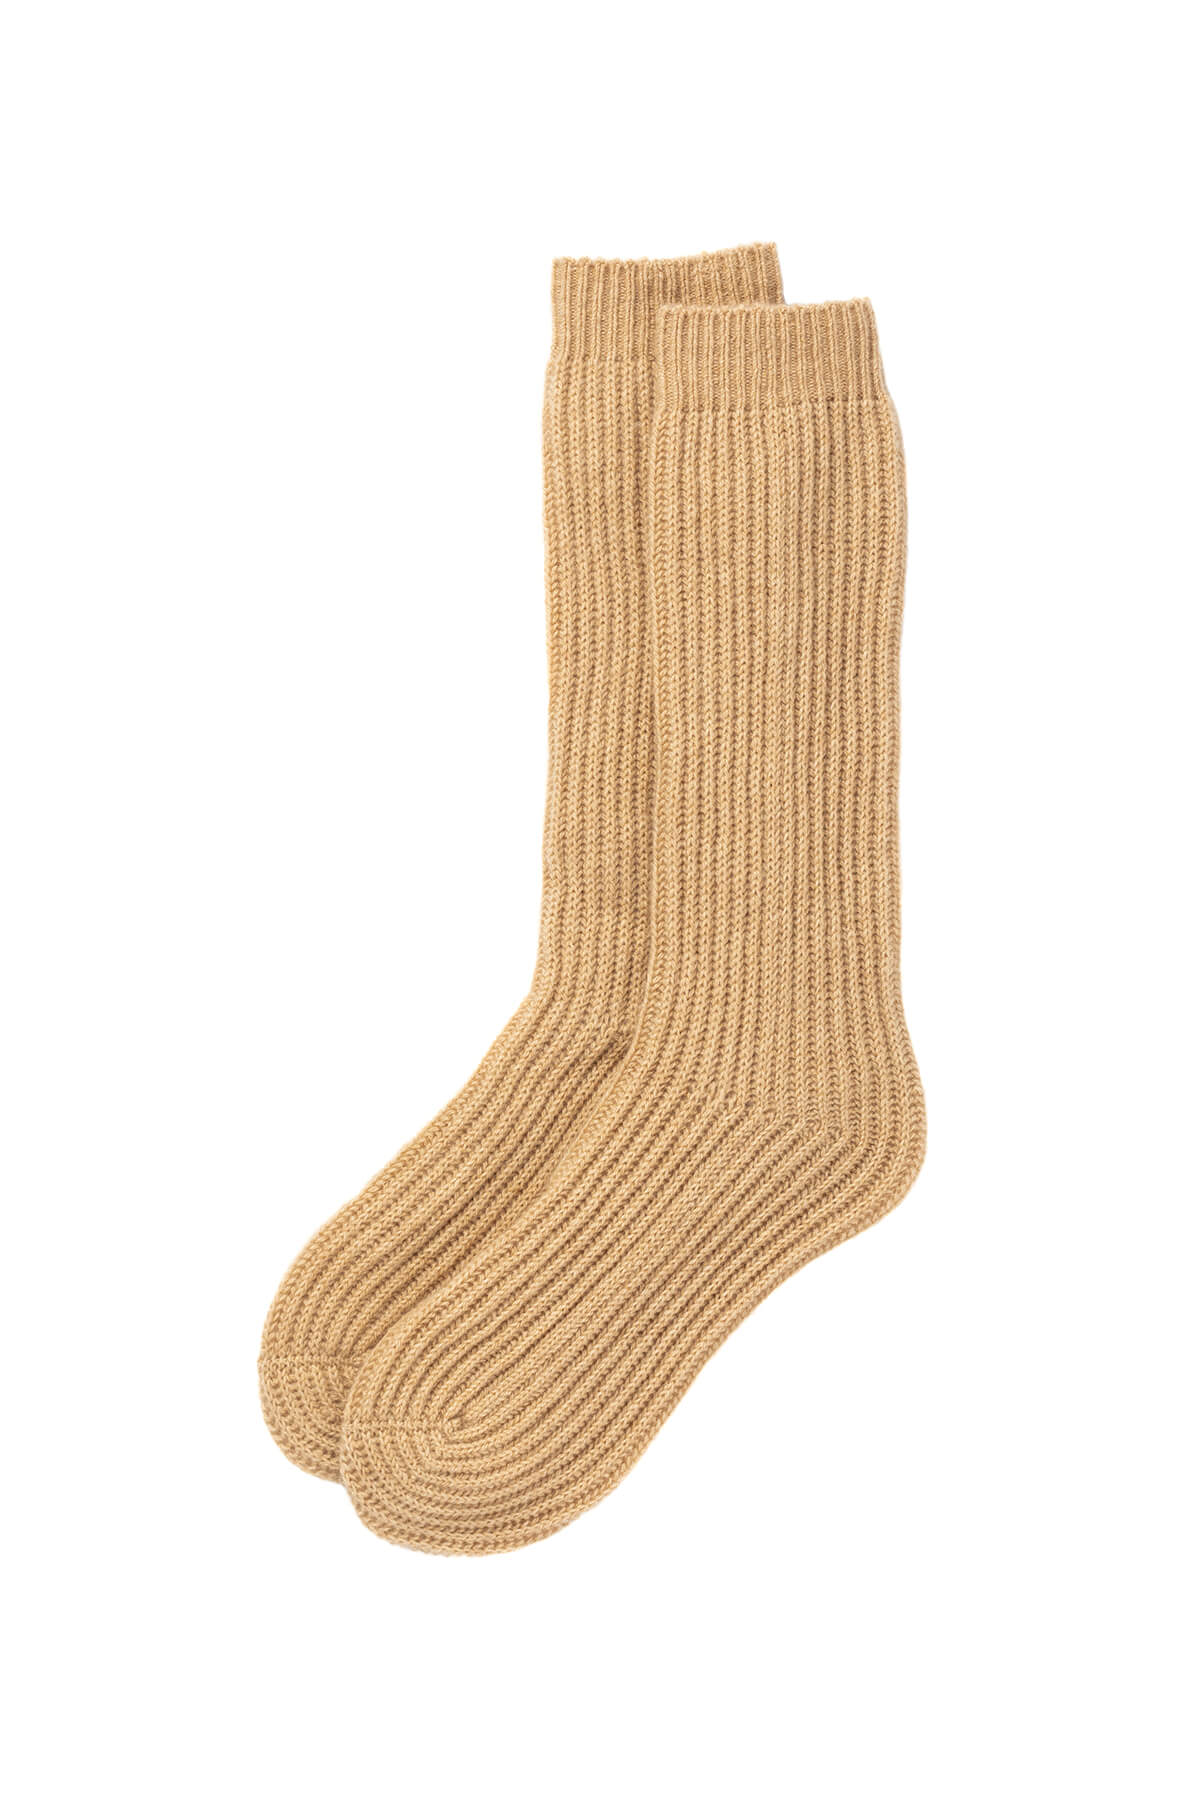 Johnstons of Elgin’s Light Camel Luxe Ribbed Cashmere Bed Socks on a white background HAE02240HB0205ONE